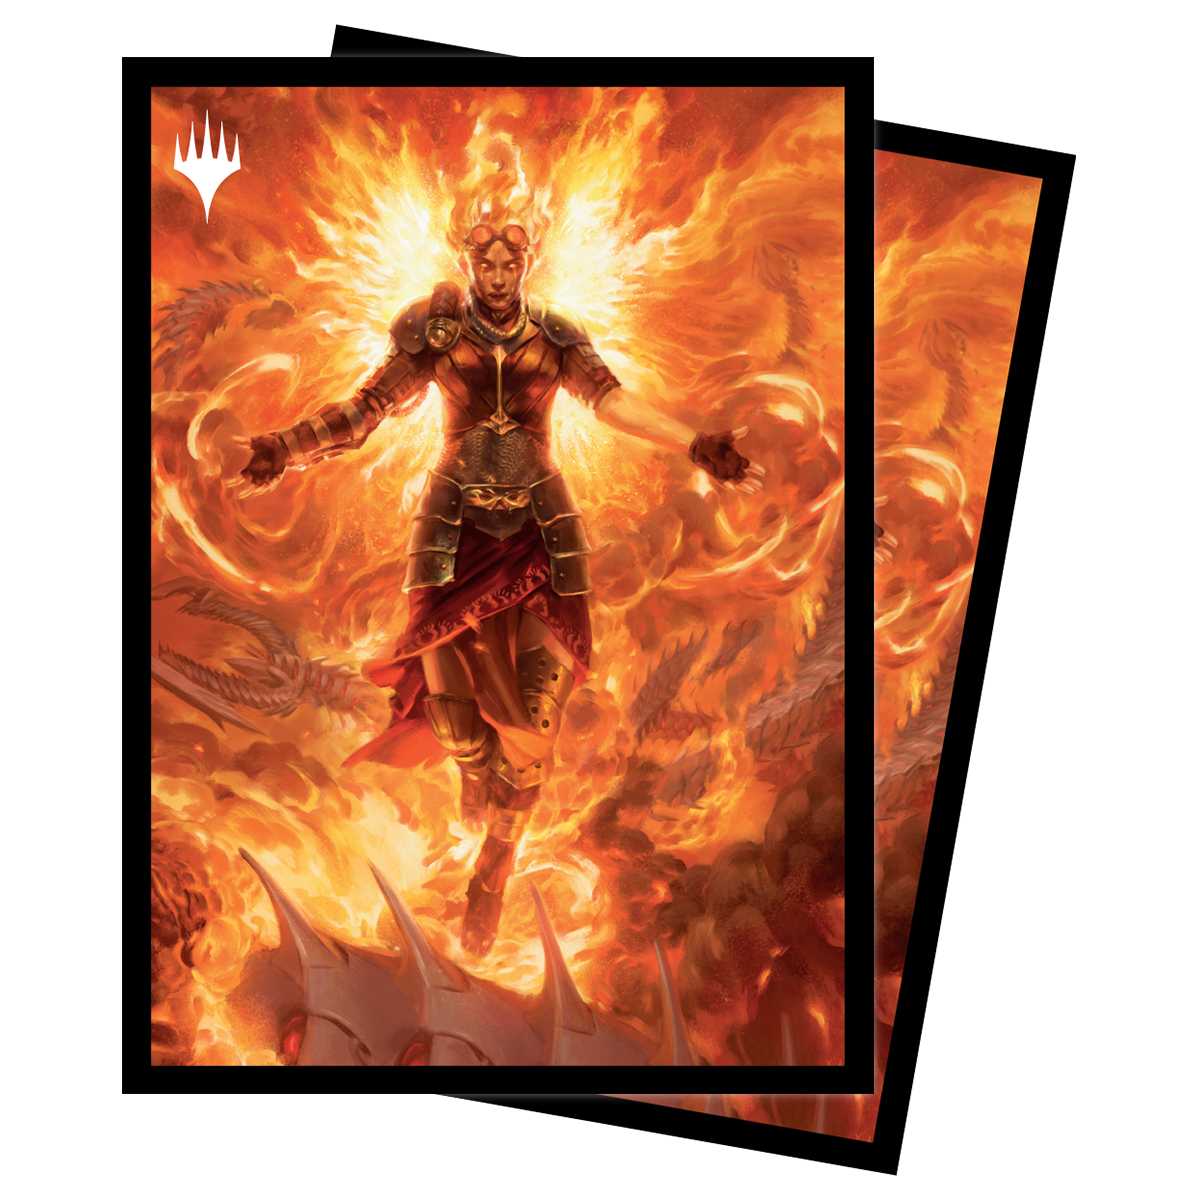 Ultra PRO: Standard 100ct Sleeves - March of the Machine (Chandra, Hope's Beacon)